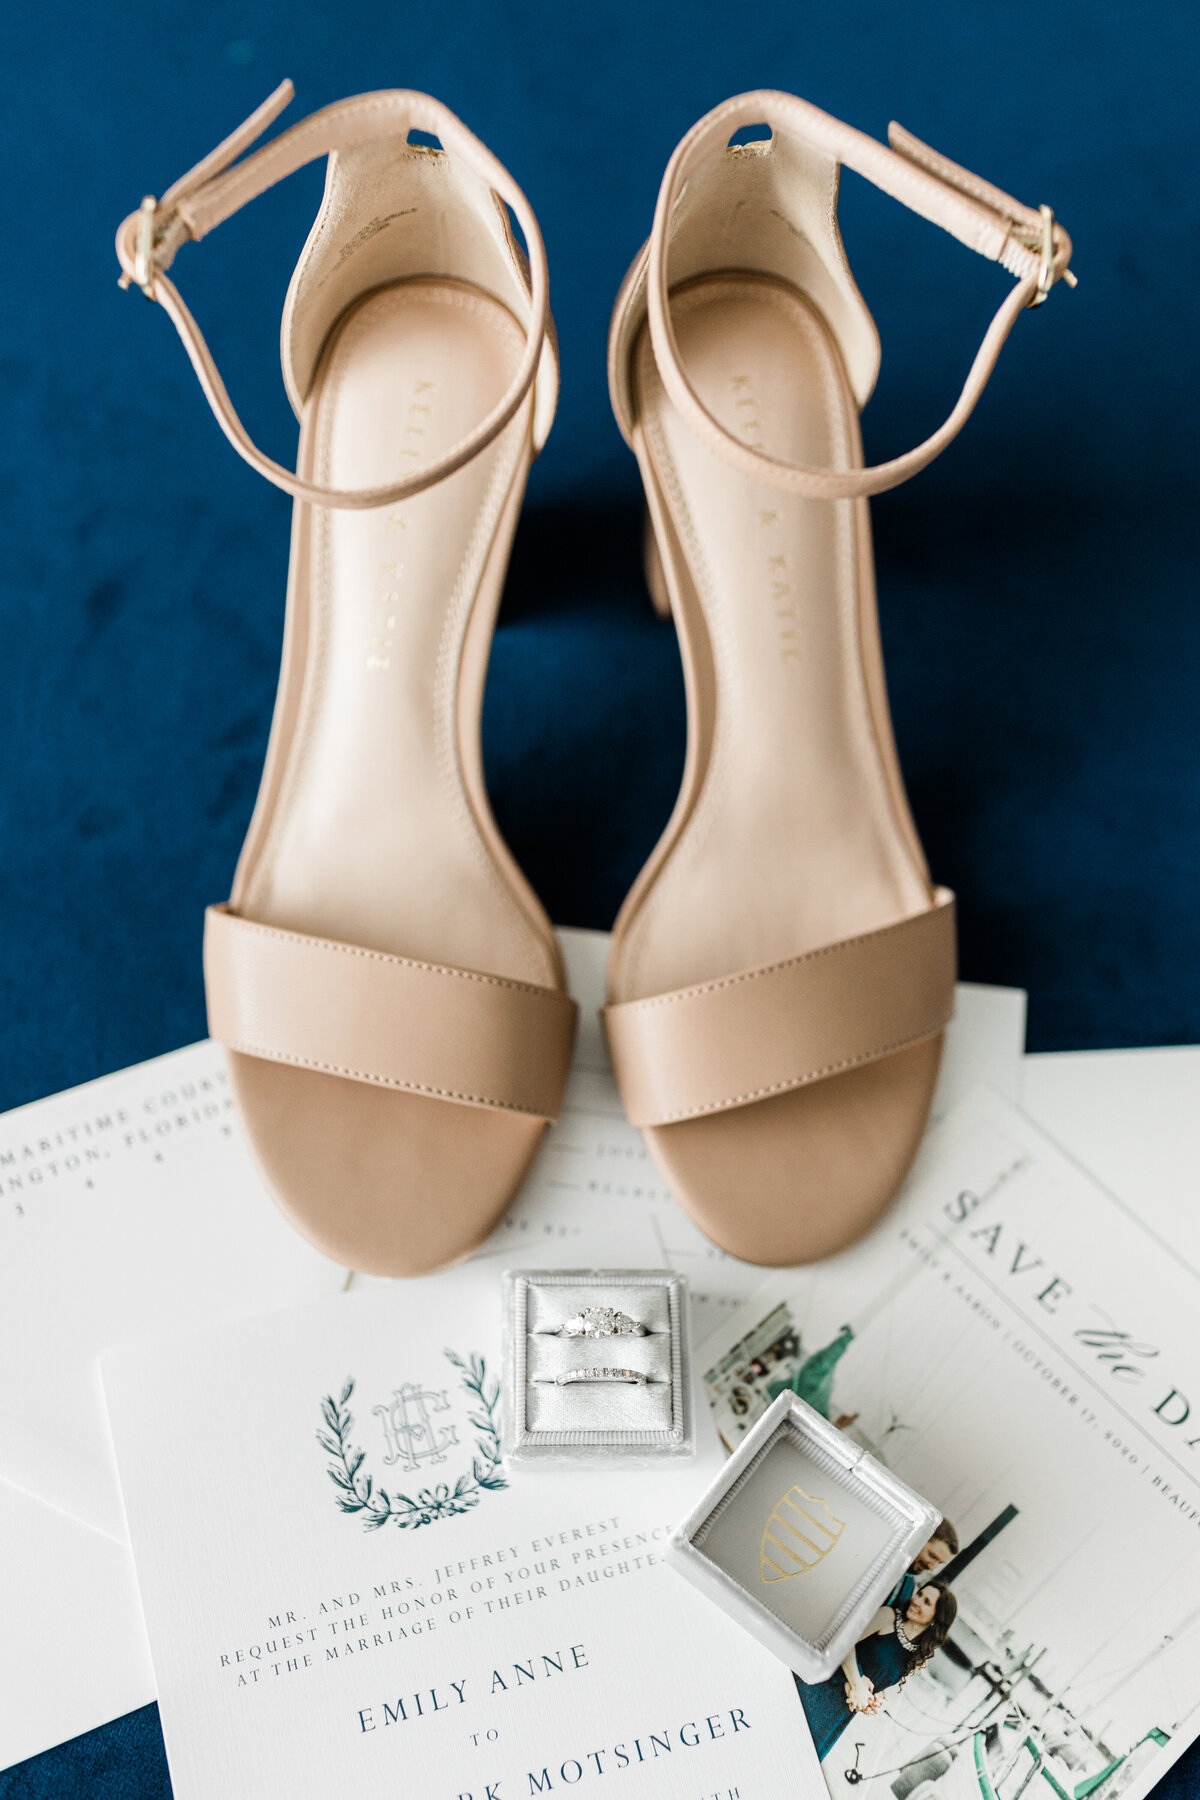 These rings and shoes on this beautiful blue backdrop really shine.